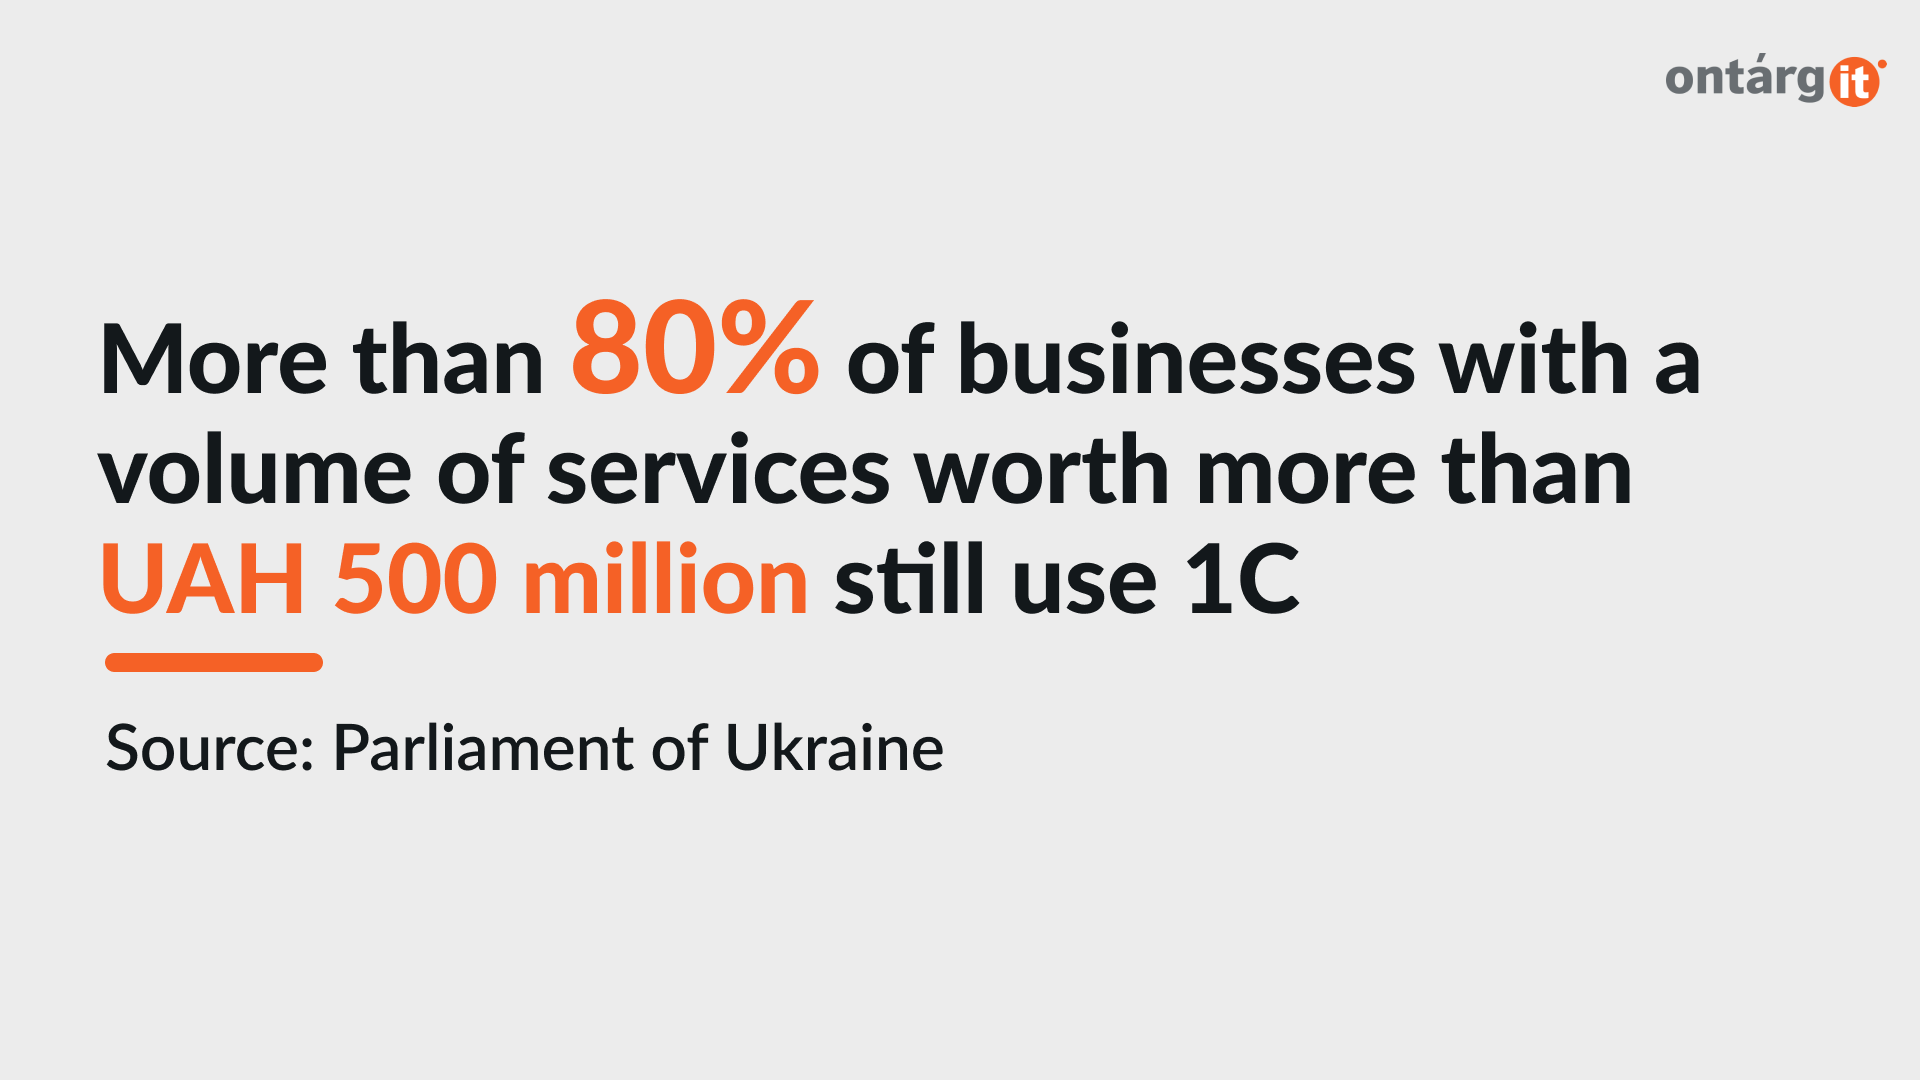 More than 80% of businesses with a volume of services worth more than UAH 500 million still use 1C